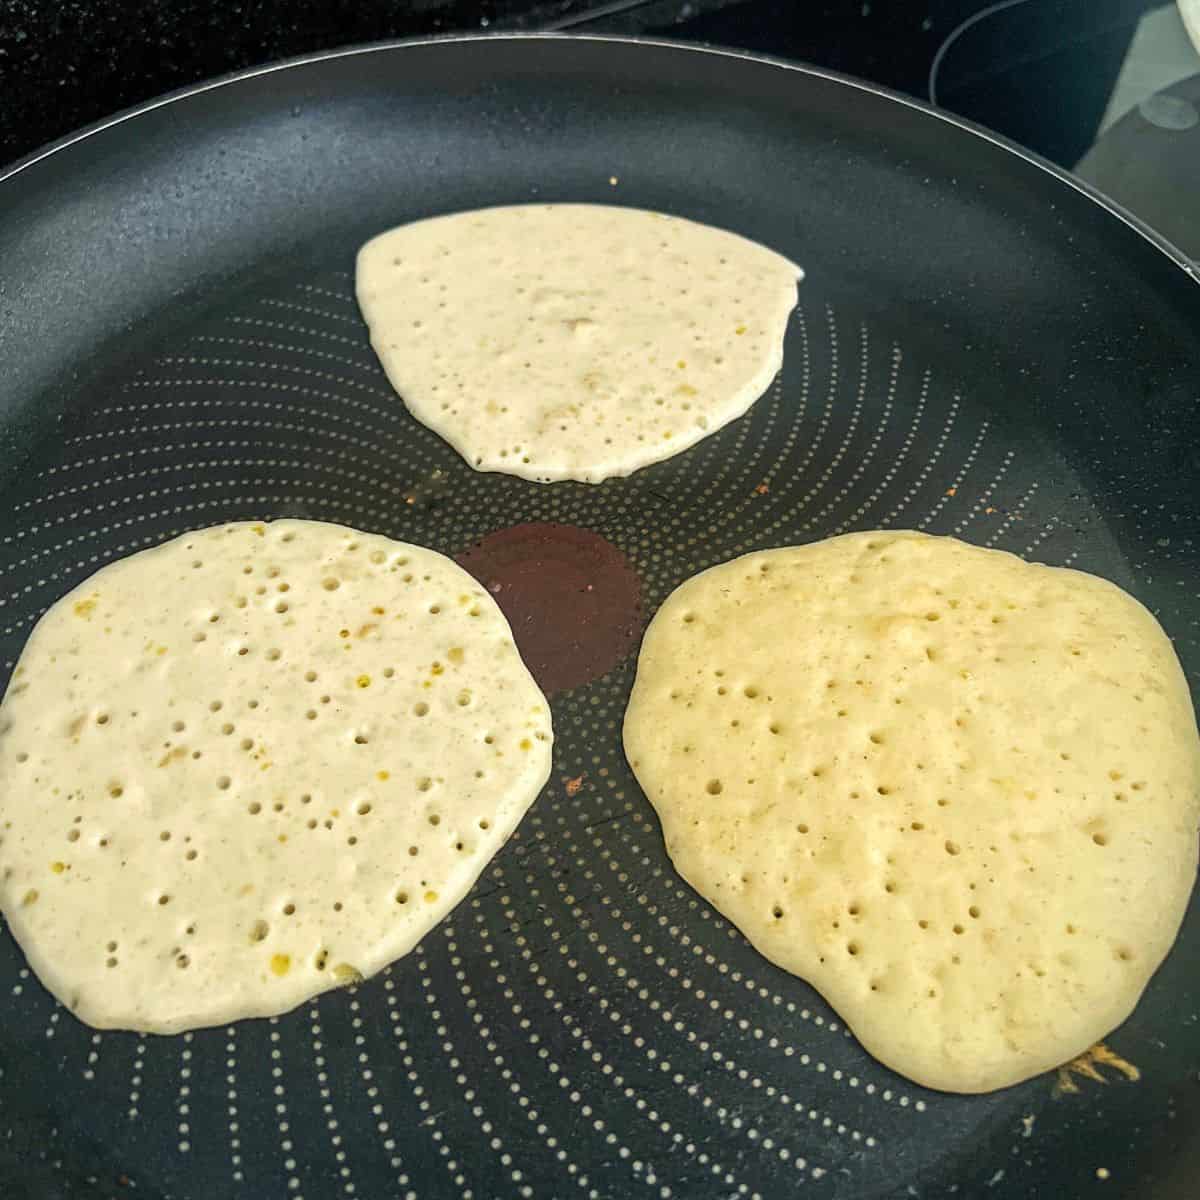 Three pancakes cooking in a frying pan.